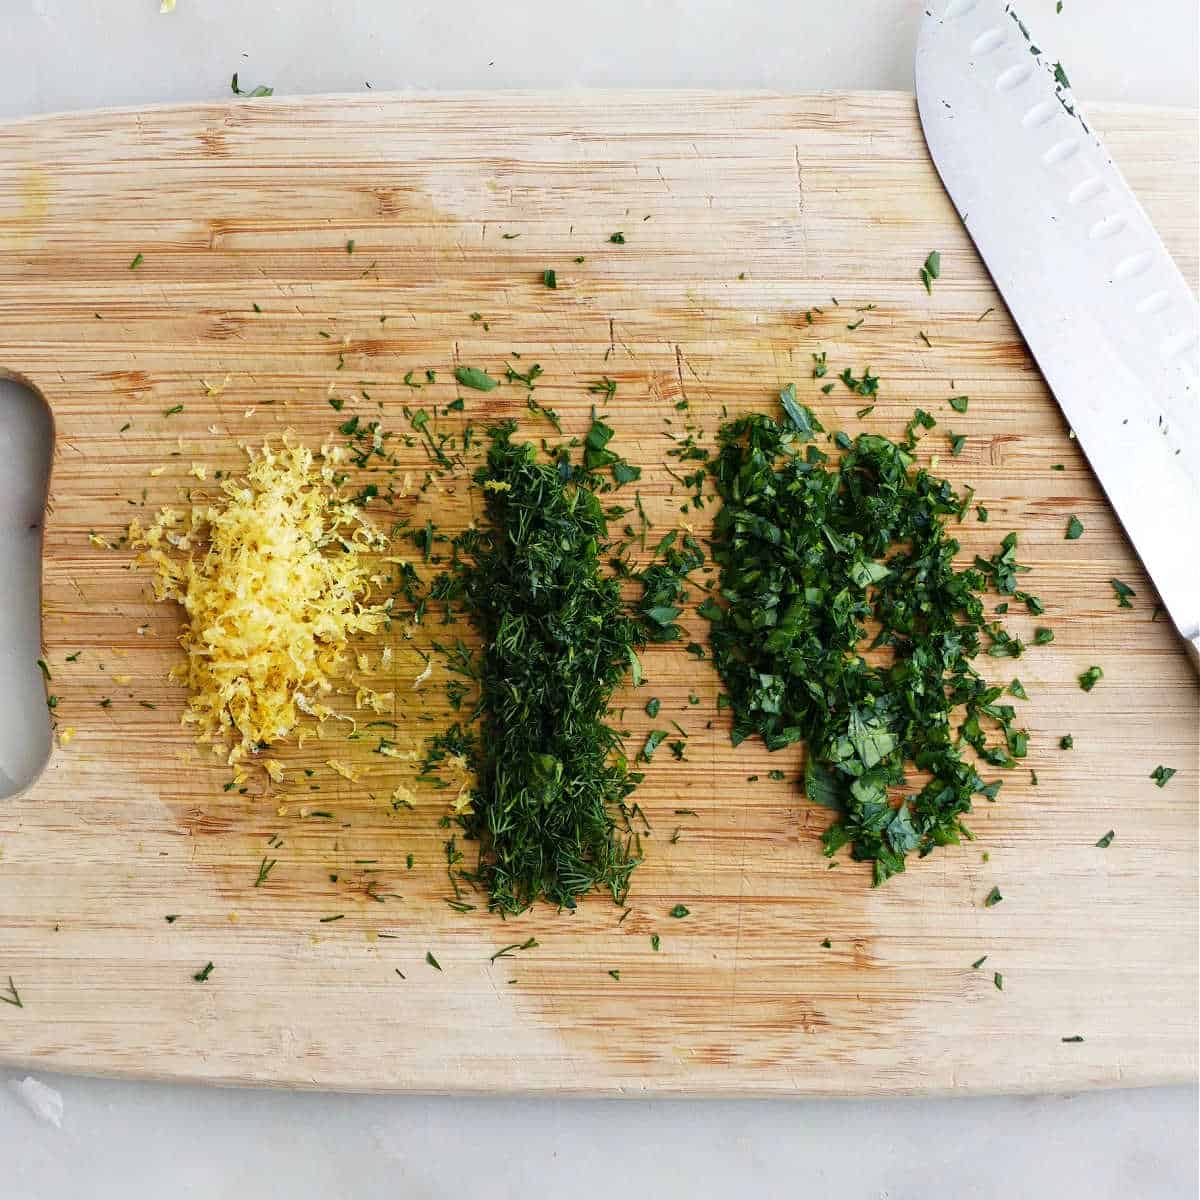 lemon zest next to chopped dill and parsley on a cutting board